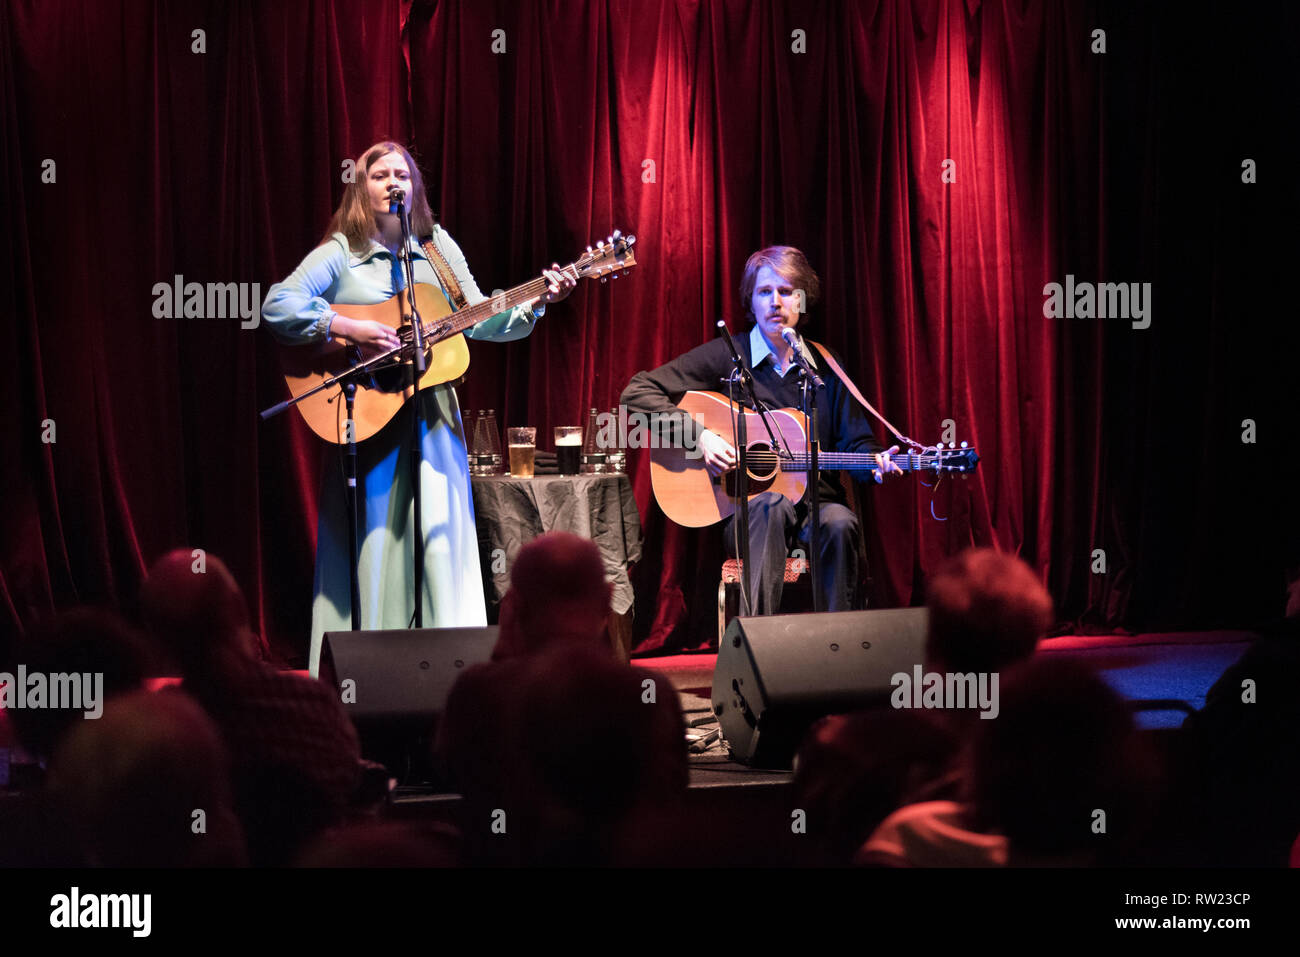 Hebden Bridge, Yorkshire, UK. 3rd March, 2019. Canadian country-folk duo Kacy and Clayton in concert at The Trades Club, Hebden Bridge, West Yorkshire, 3rd March 2019 Credit: John Bentley/Alamy Live News Stock Photo